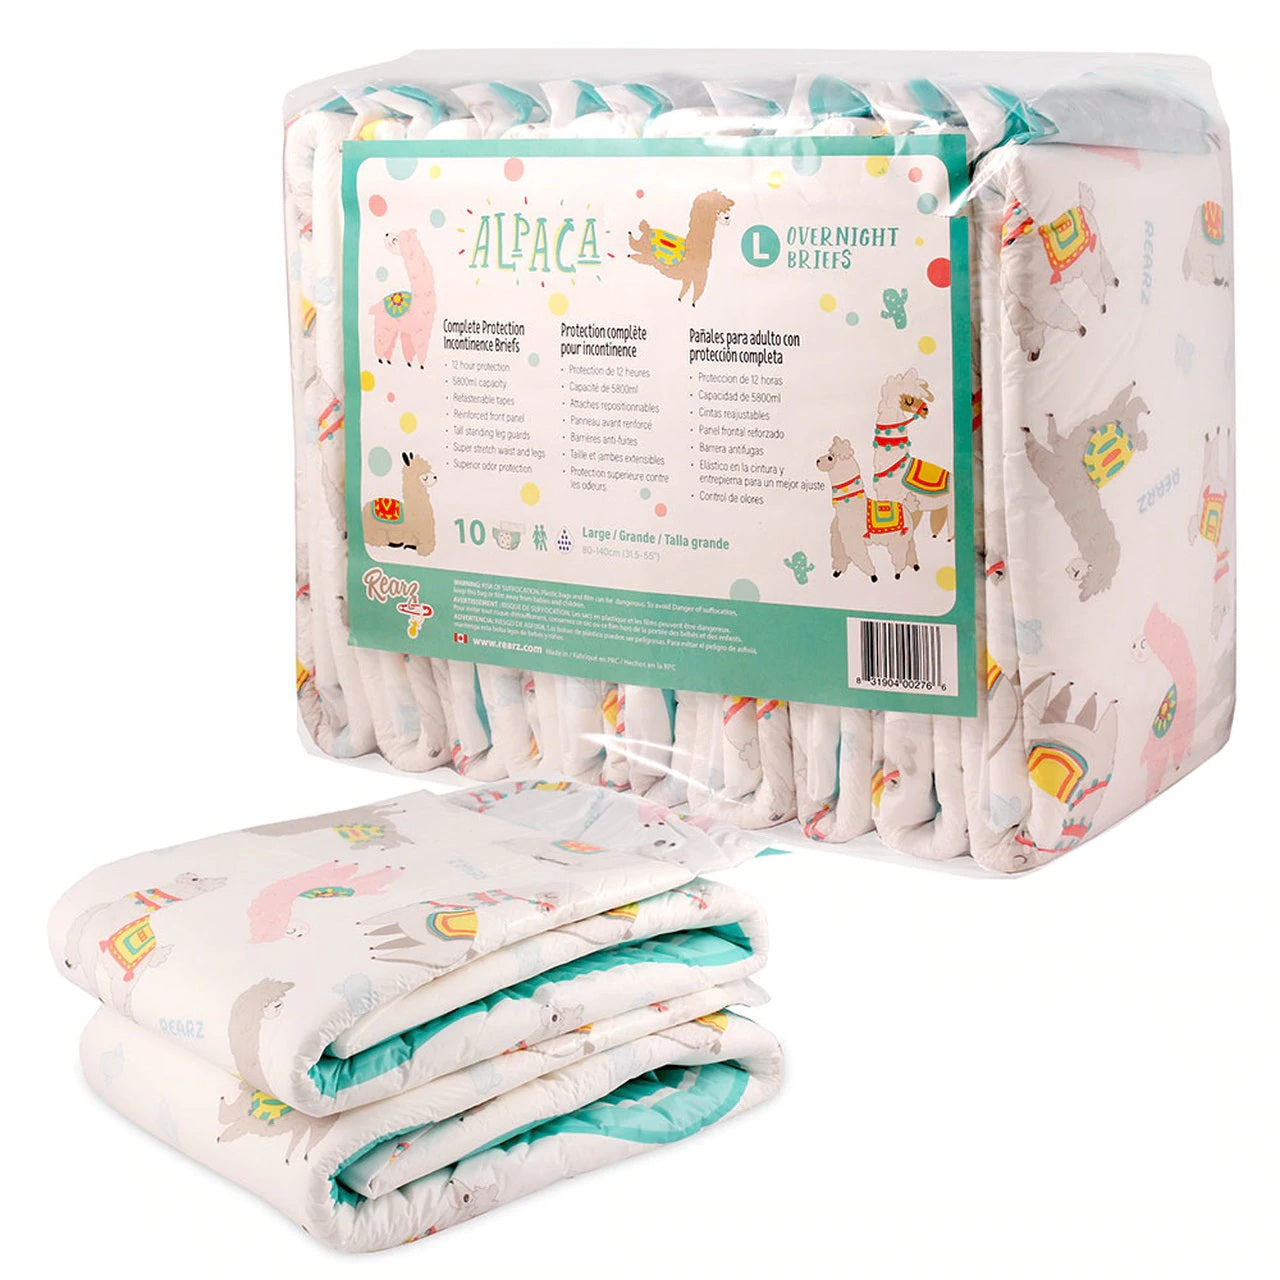 2 folded disposable alpaca diapers in front of a package of 10 alpaca diapers.